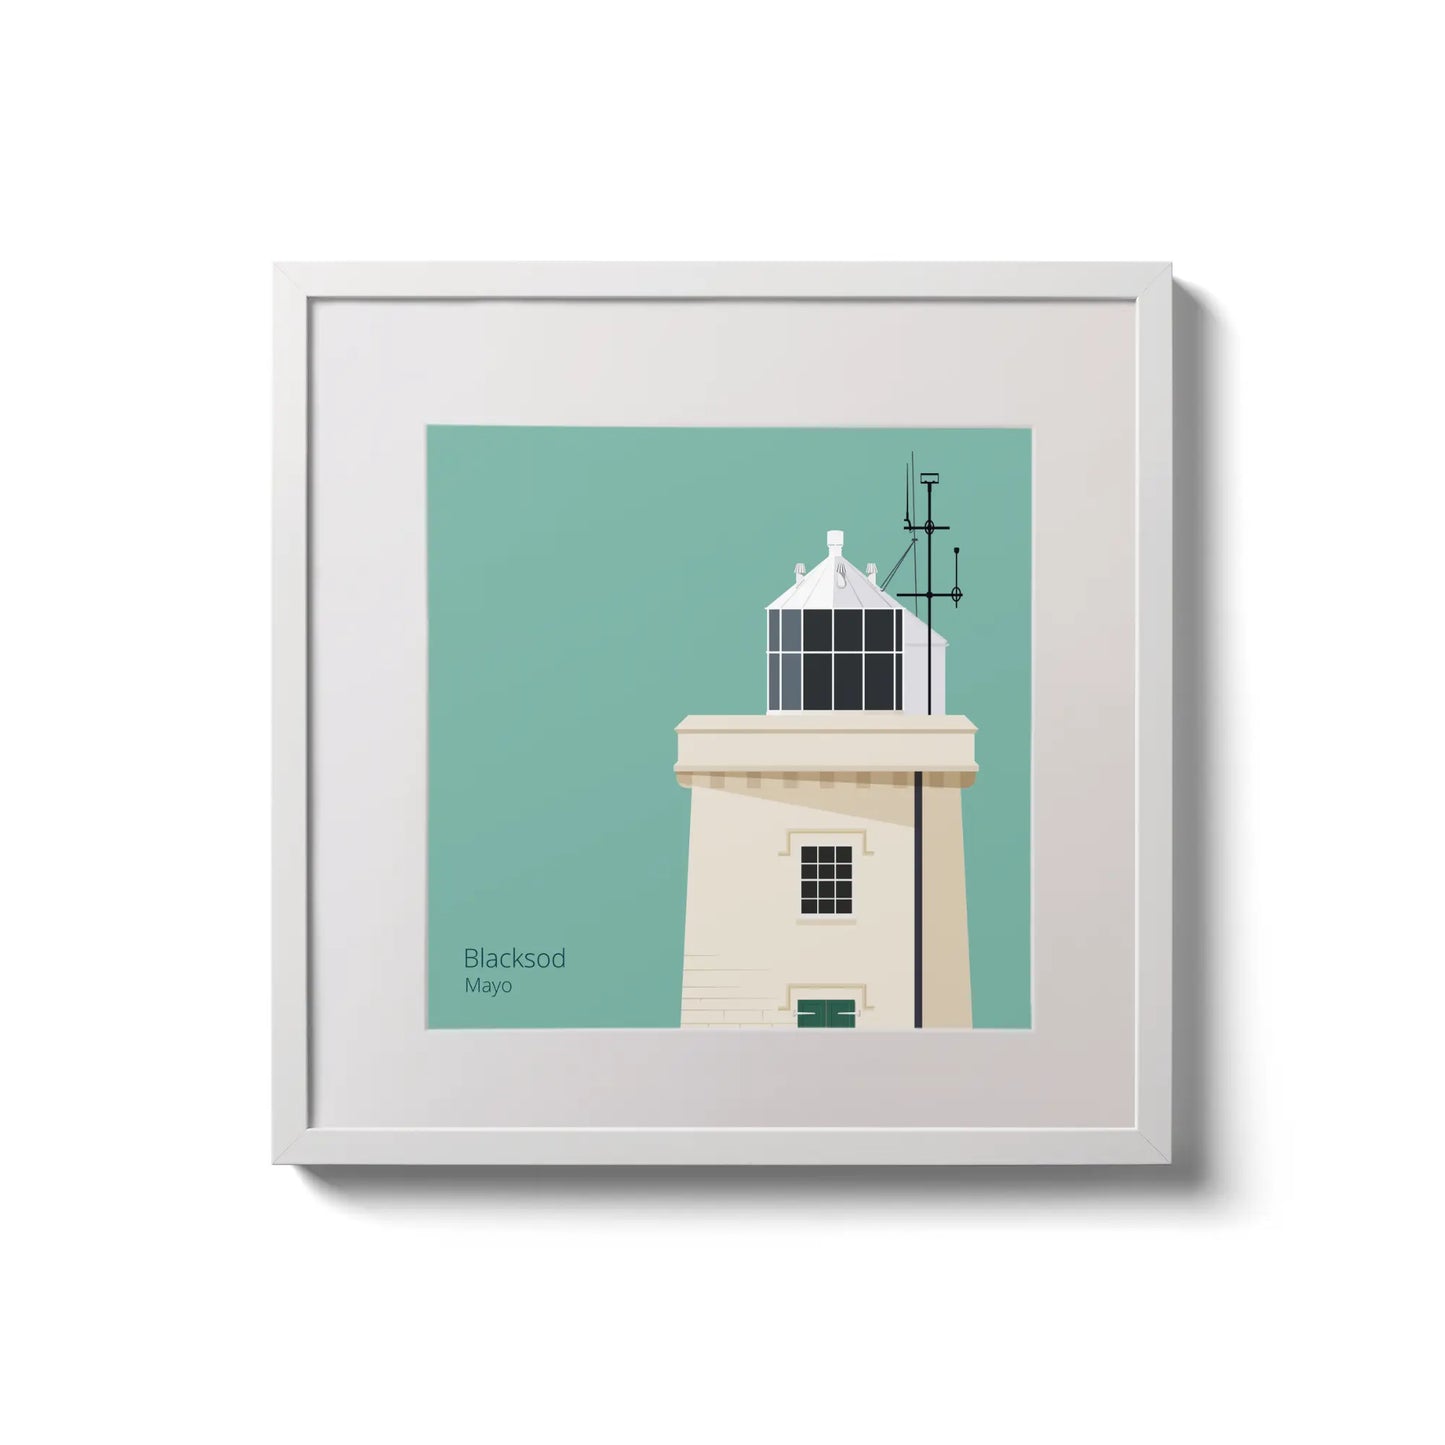 Illustration of Blacksod lighthouse on an ocean green background,  in a white square frame measuring 20x20cm.